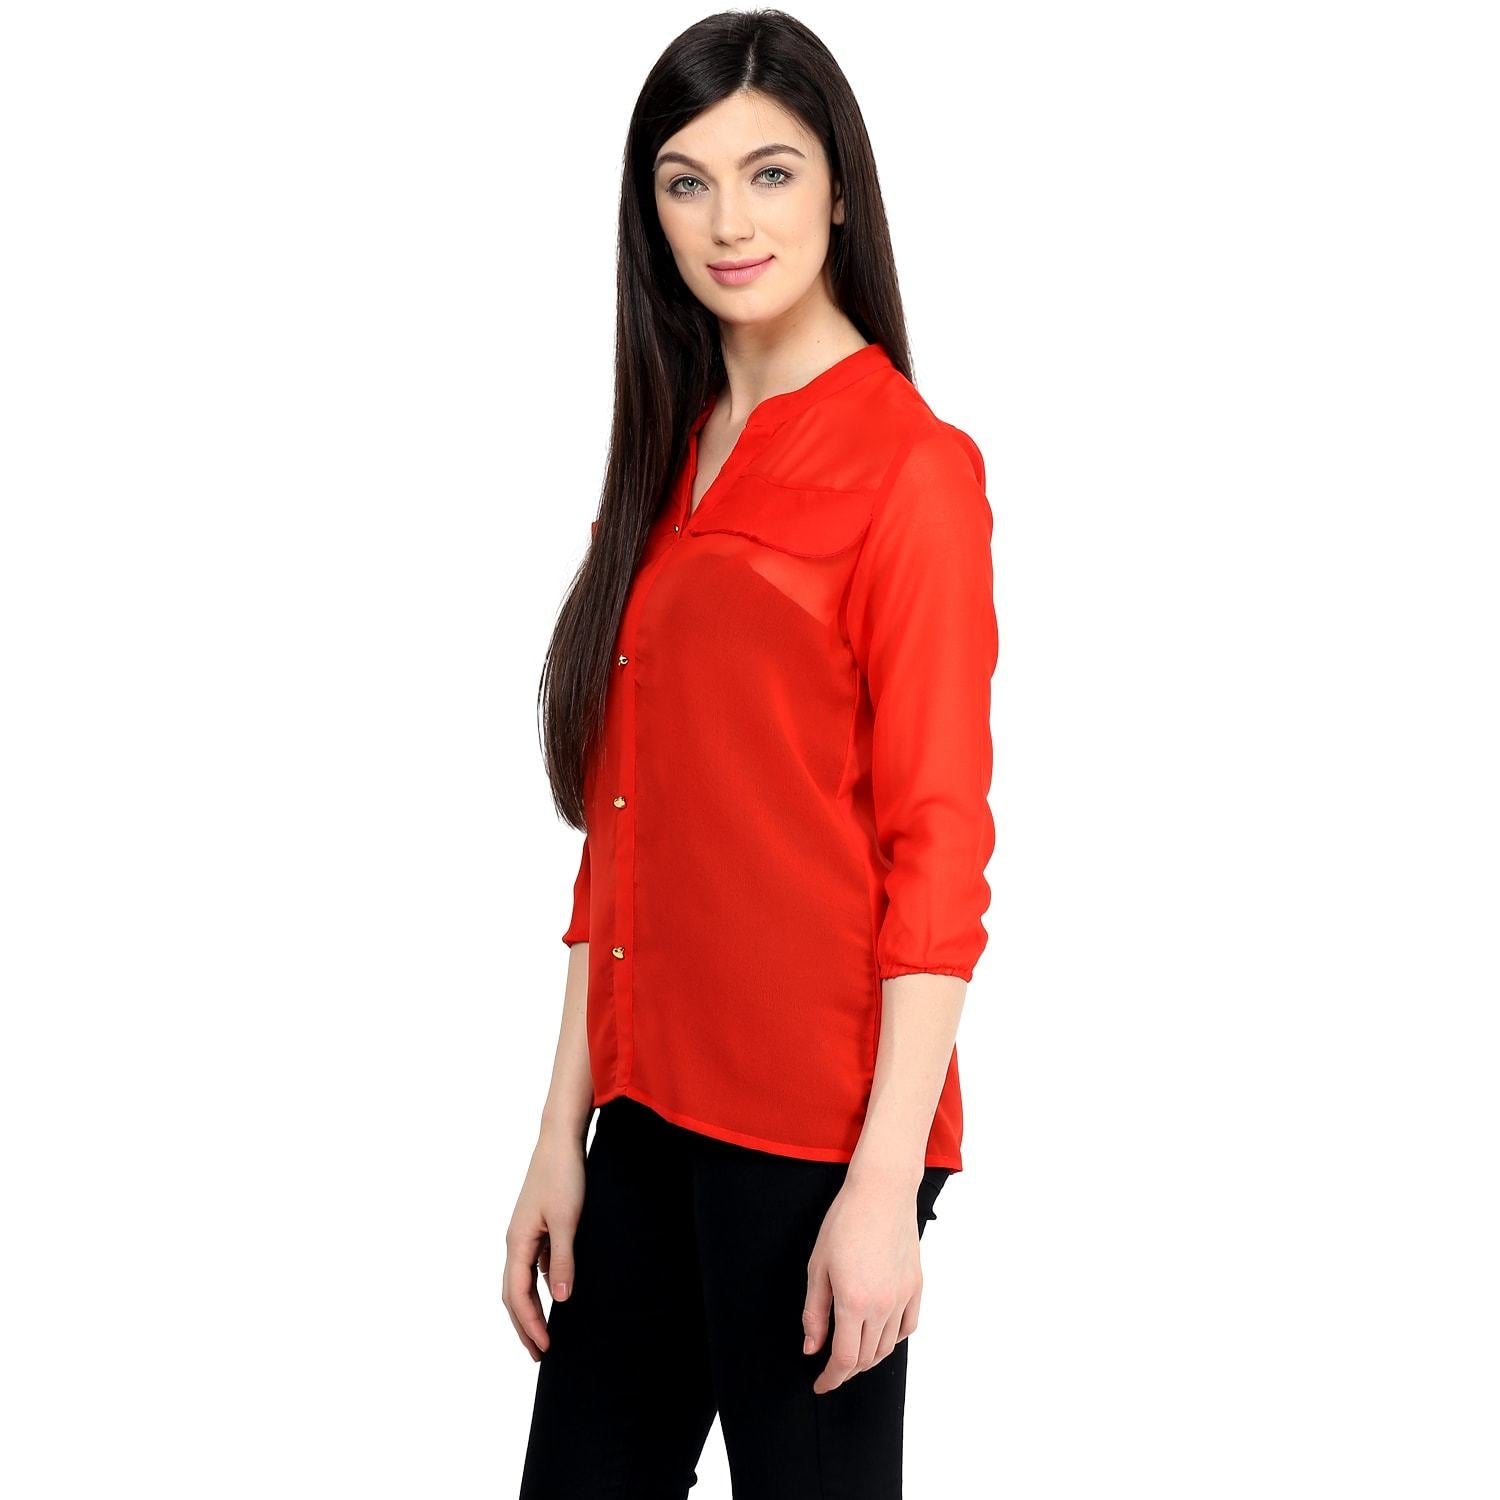 Women's Solid Frill Top - Pannkh